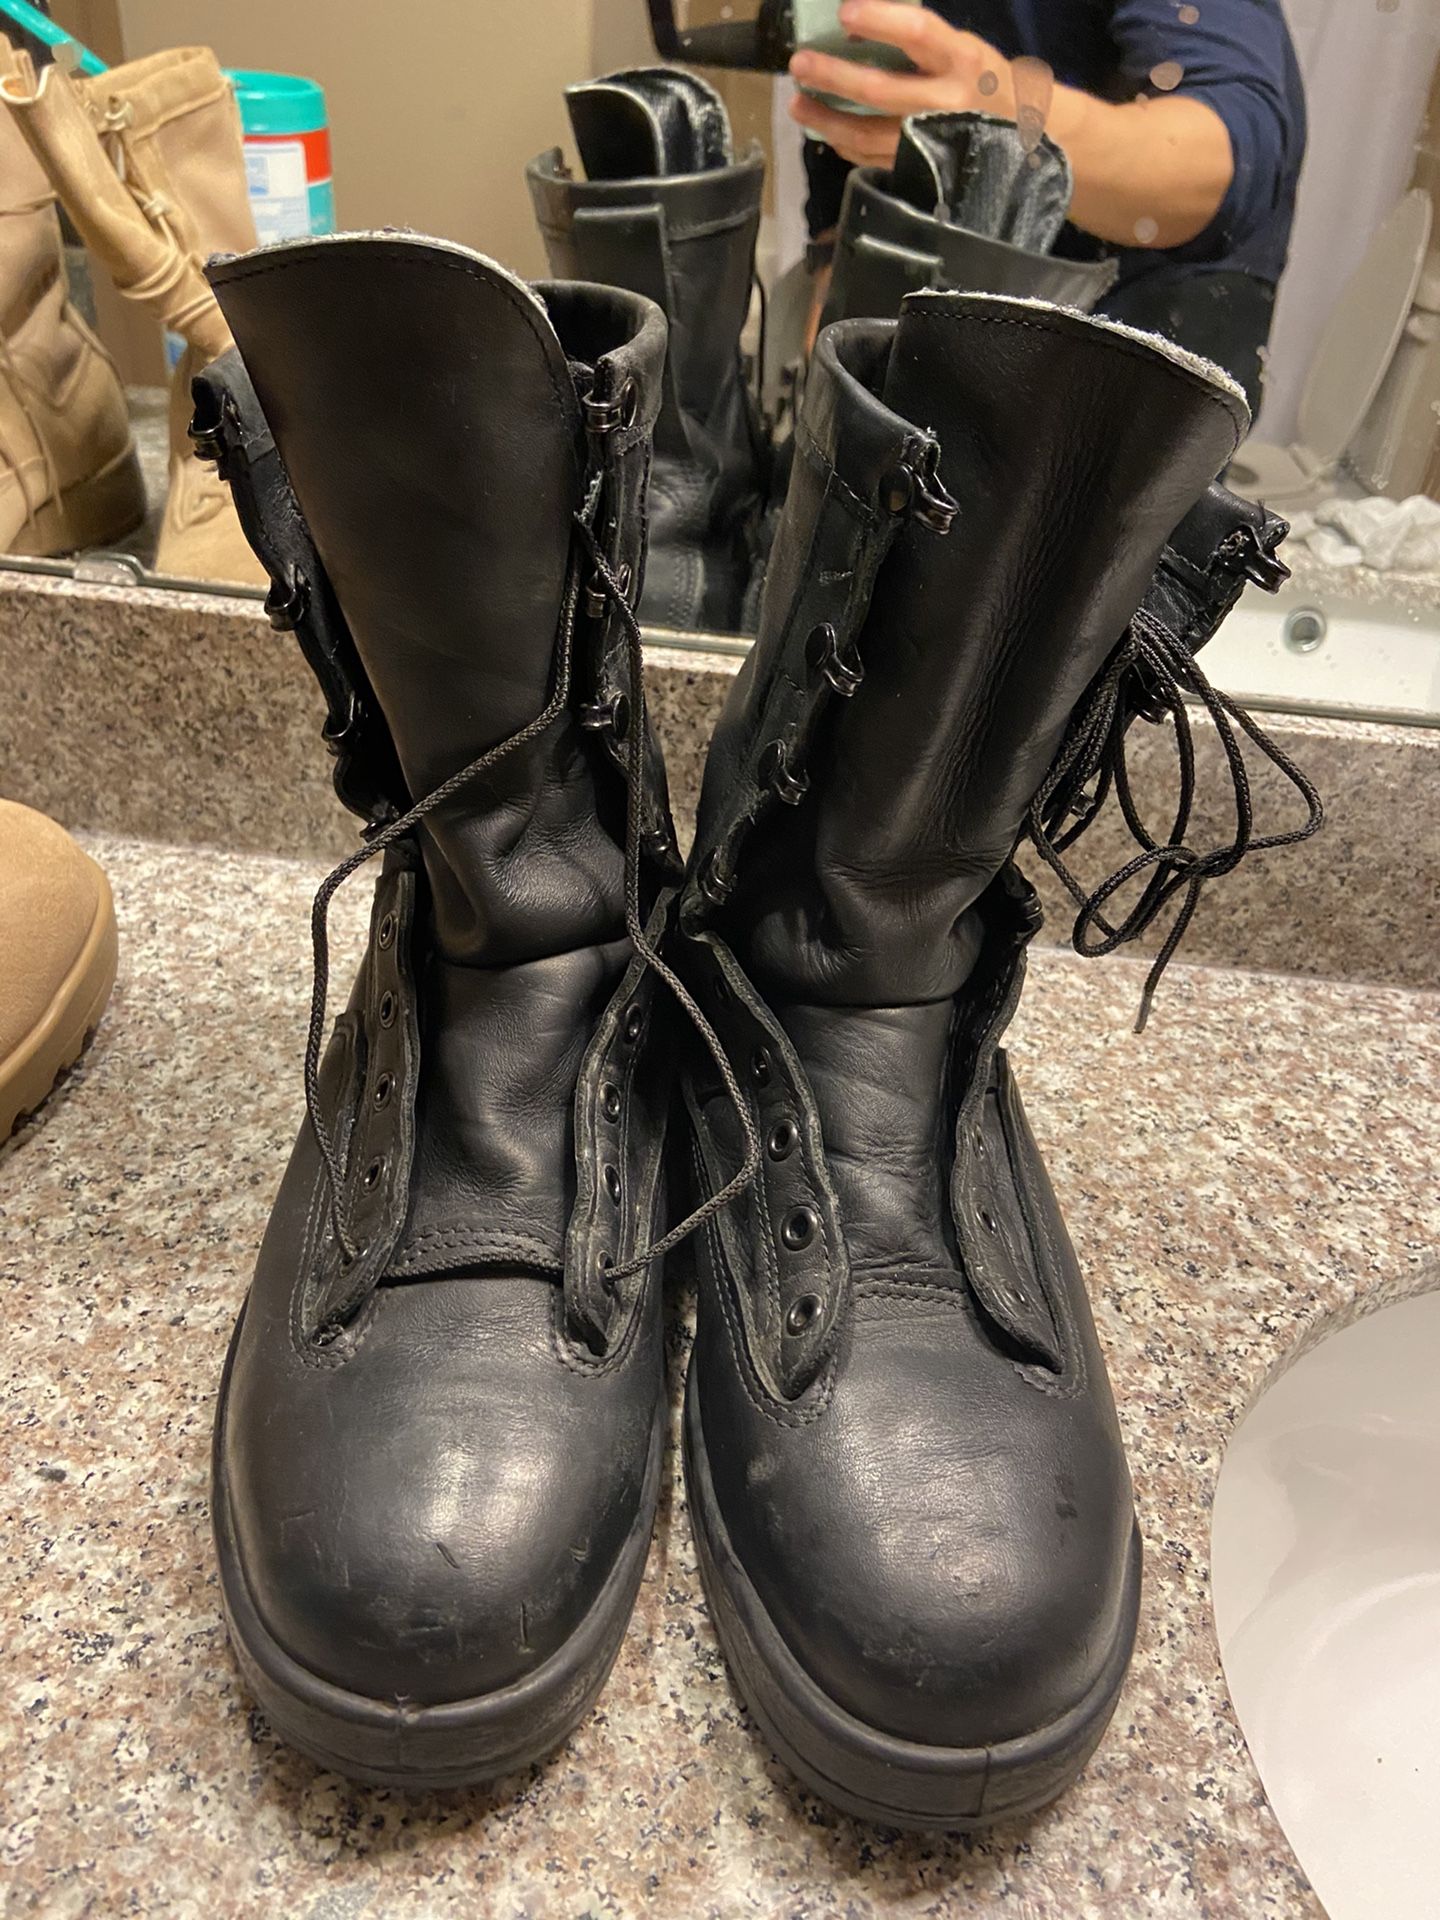 Size 9 military boots